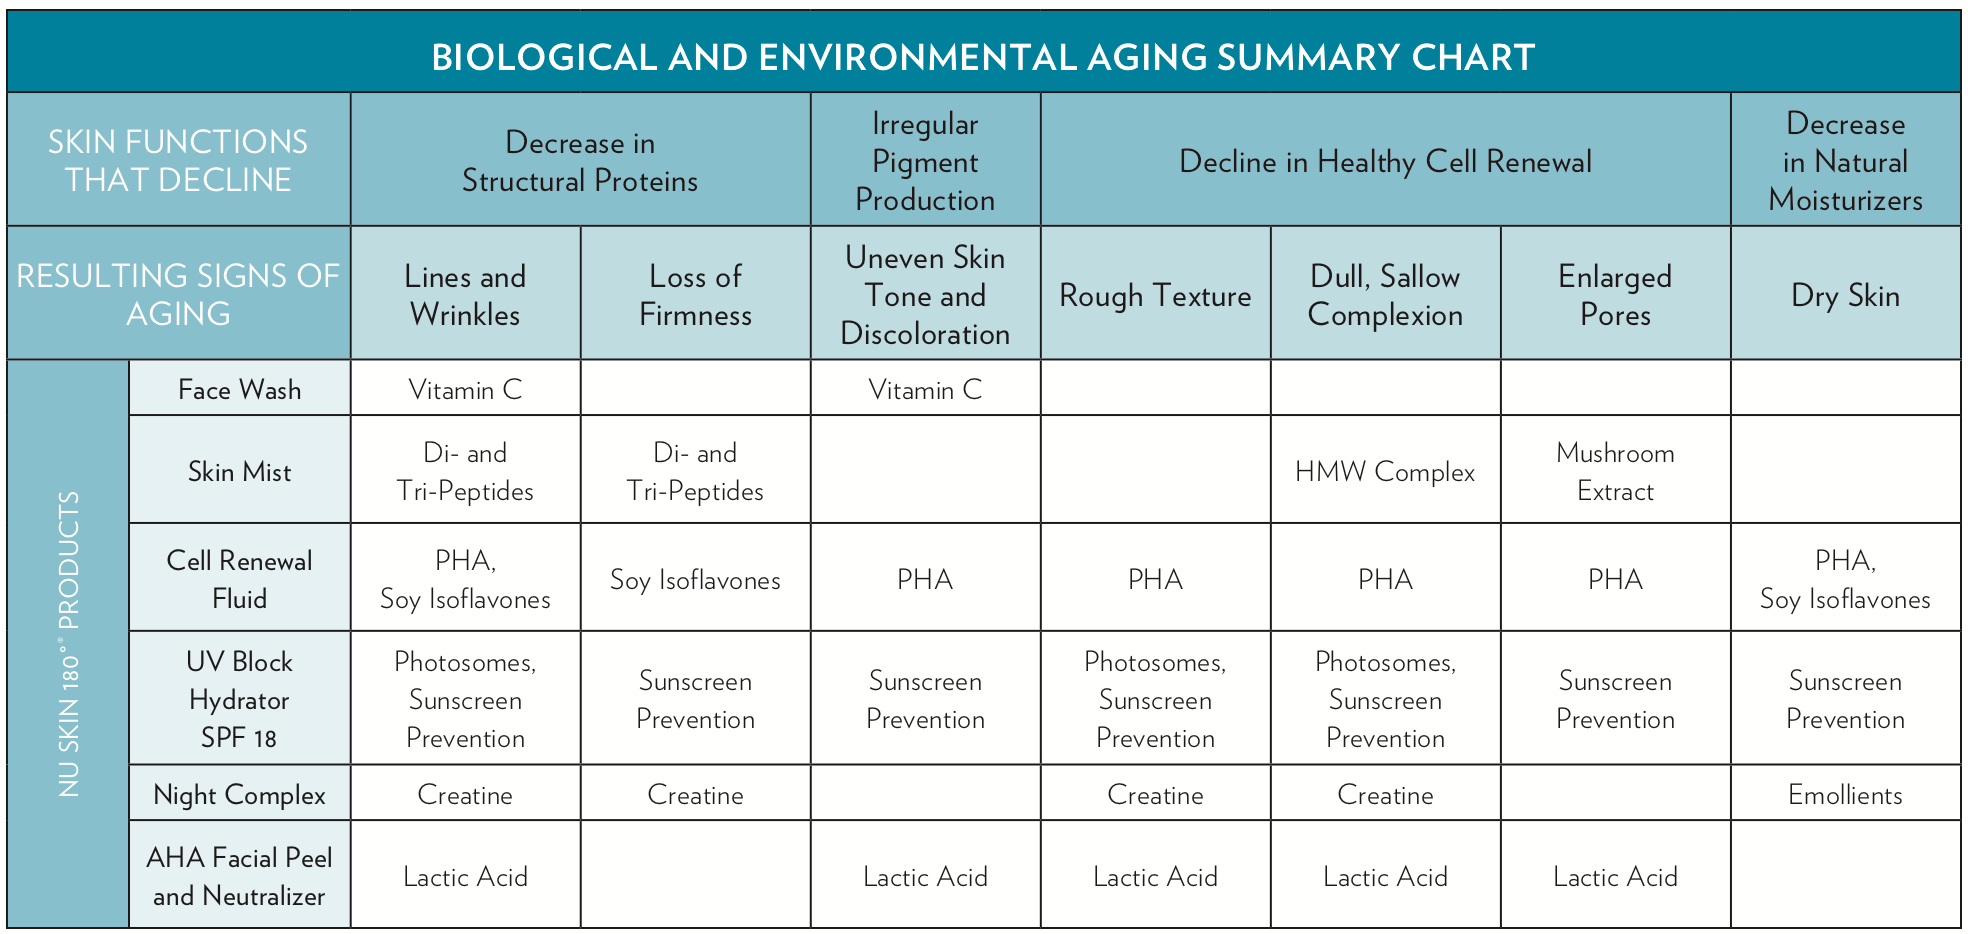 BIOLOGICAL AND ENVIRONMENTAL AGING SUMMARY CHART